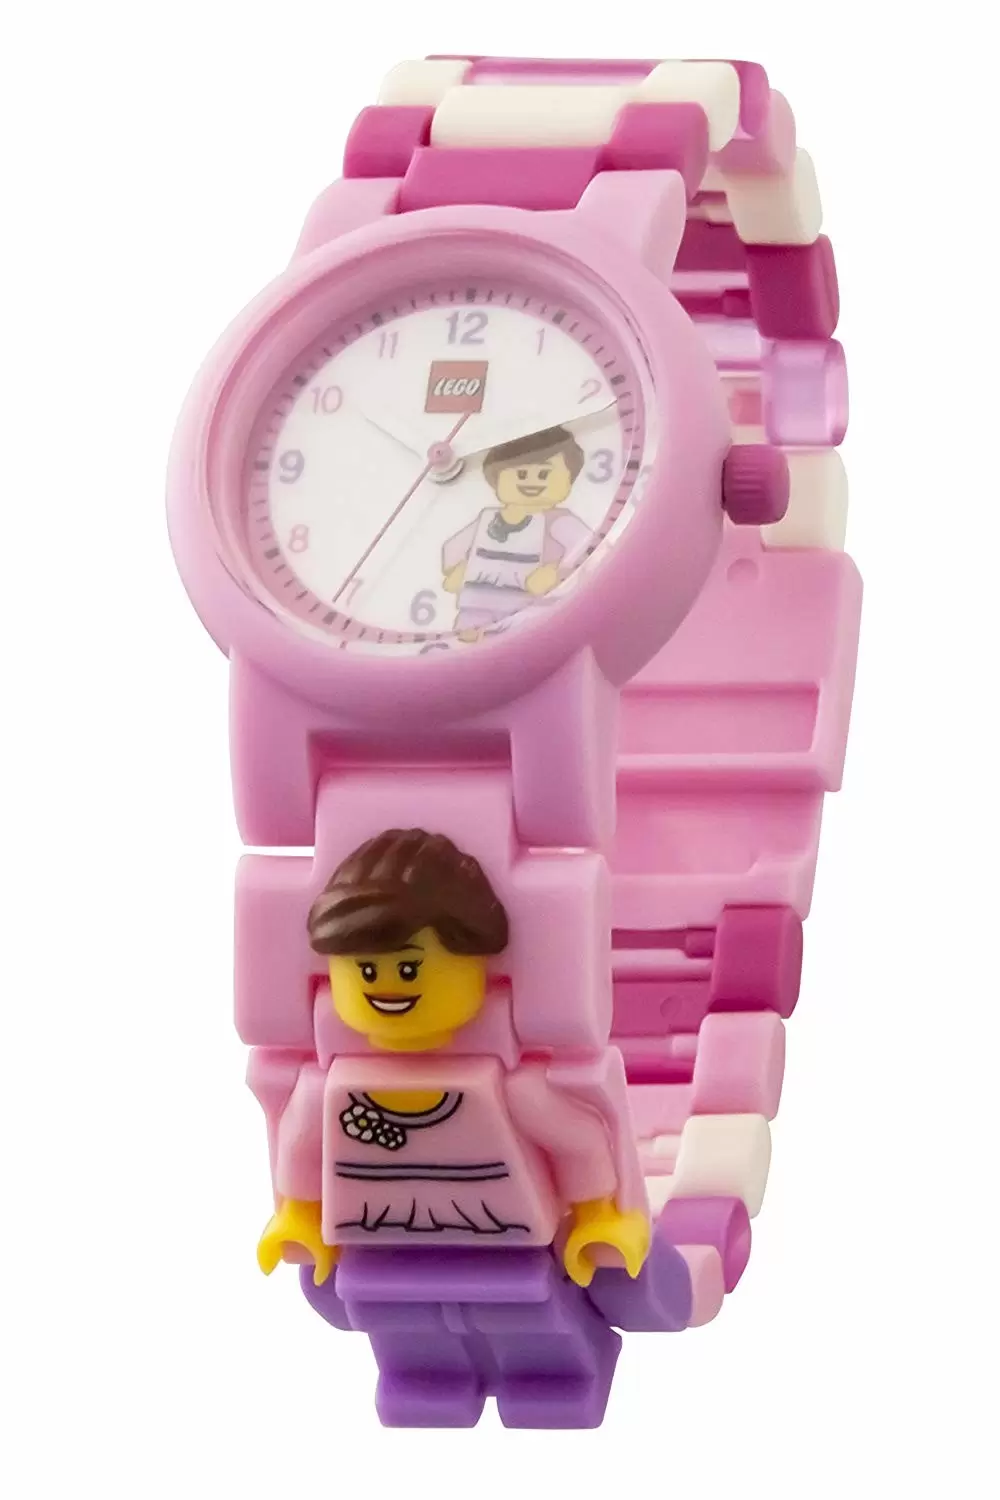 LEGO Watches - LEGO Classic Pink Minifigure Link Watch